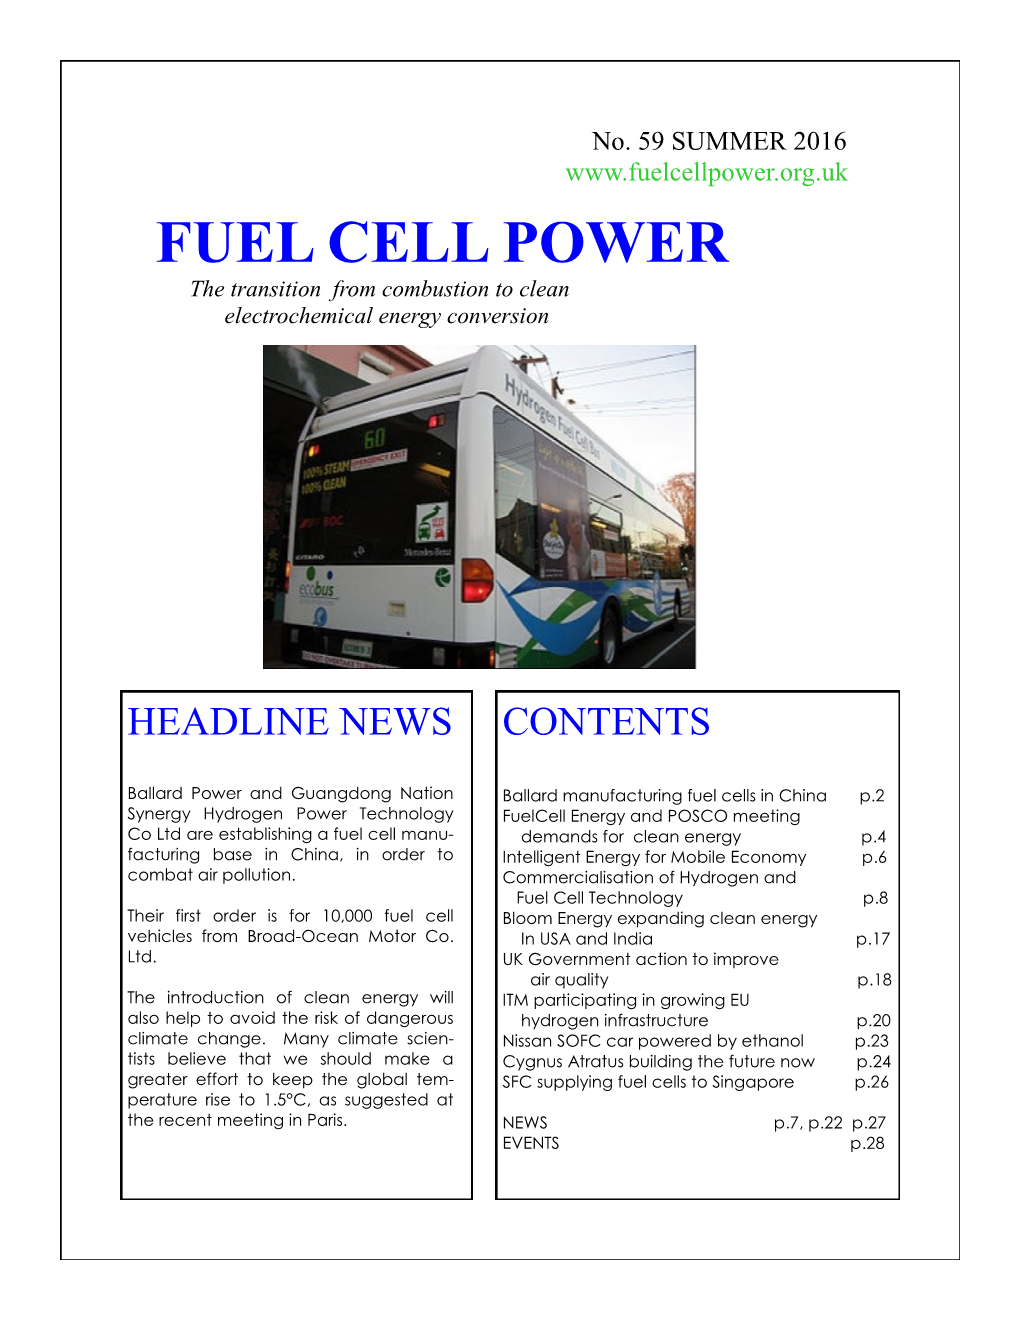 FUEL CELL POWER the Transition from Combustion to Clean Electrochemical Energy Conversion